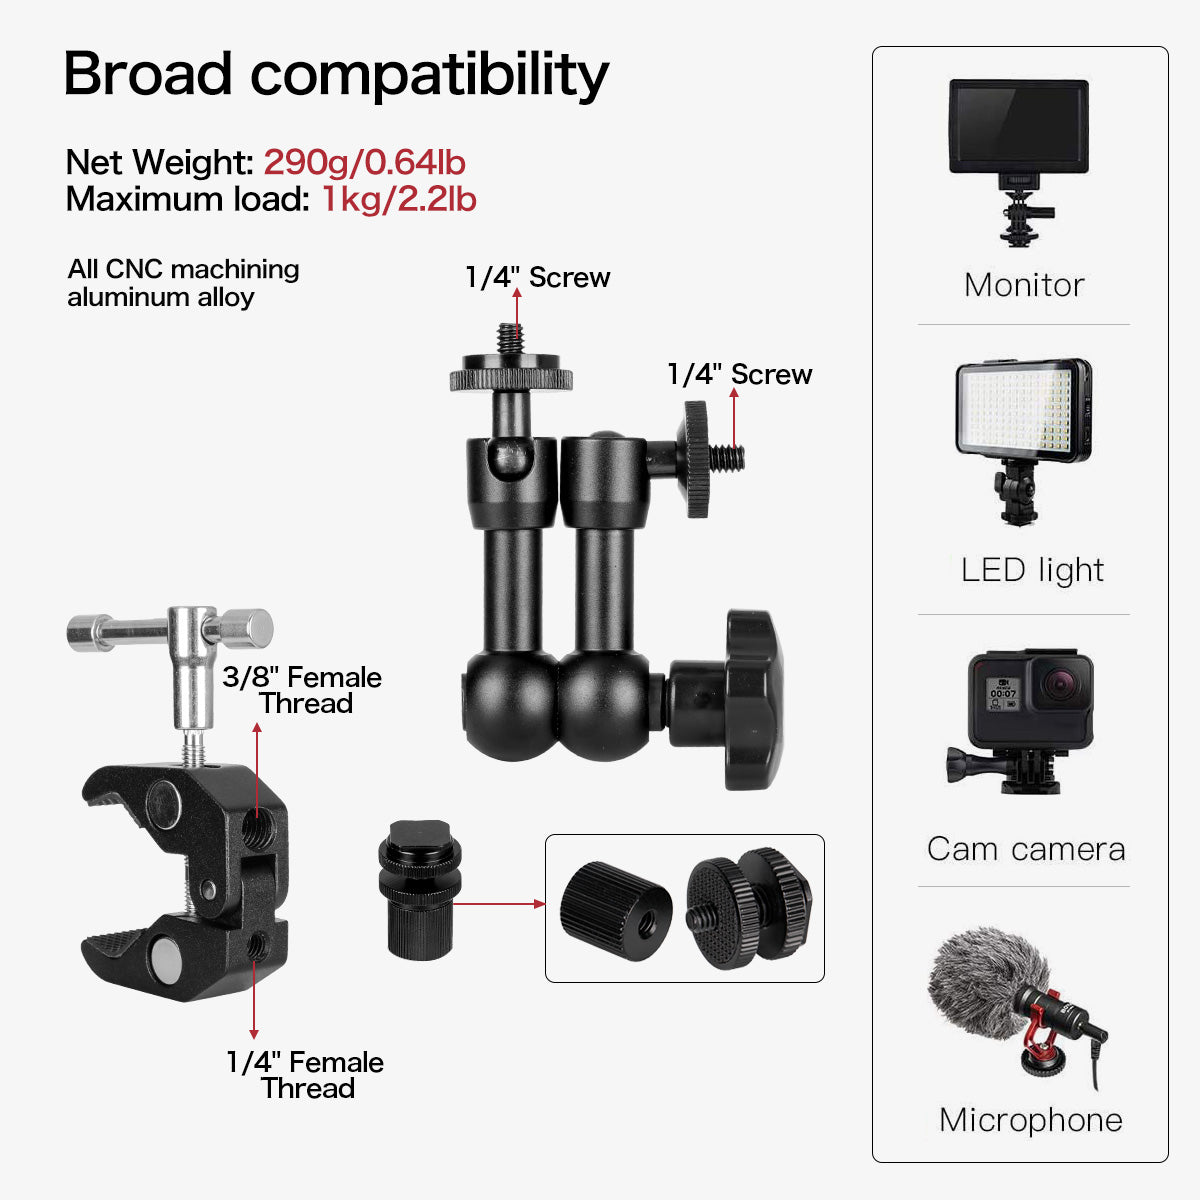 7" Magic Arm and Hot Shoe Mount 1/4" Magic DSLR Tripod Arms Kit for Photography, Video,Camera Rig, LED Light,Flashlight,Microphone